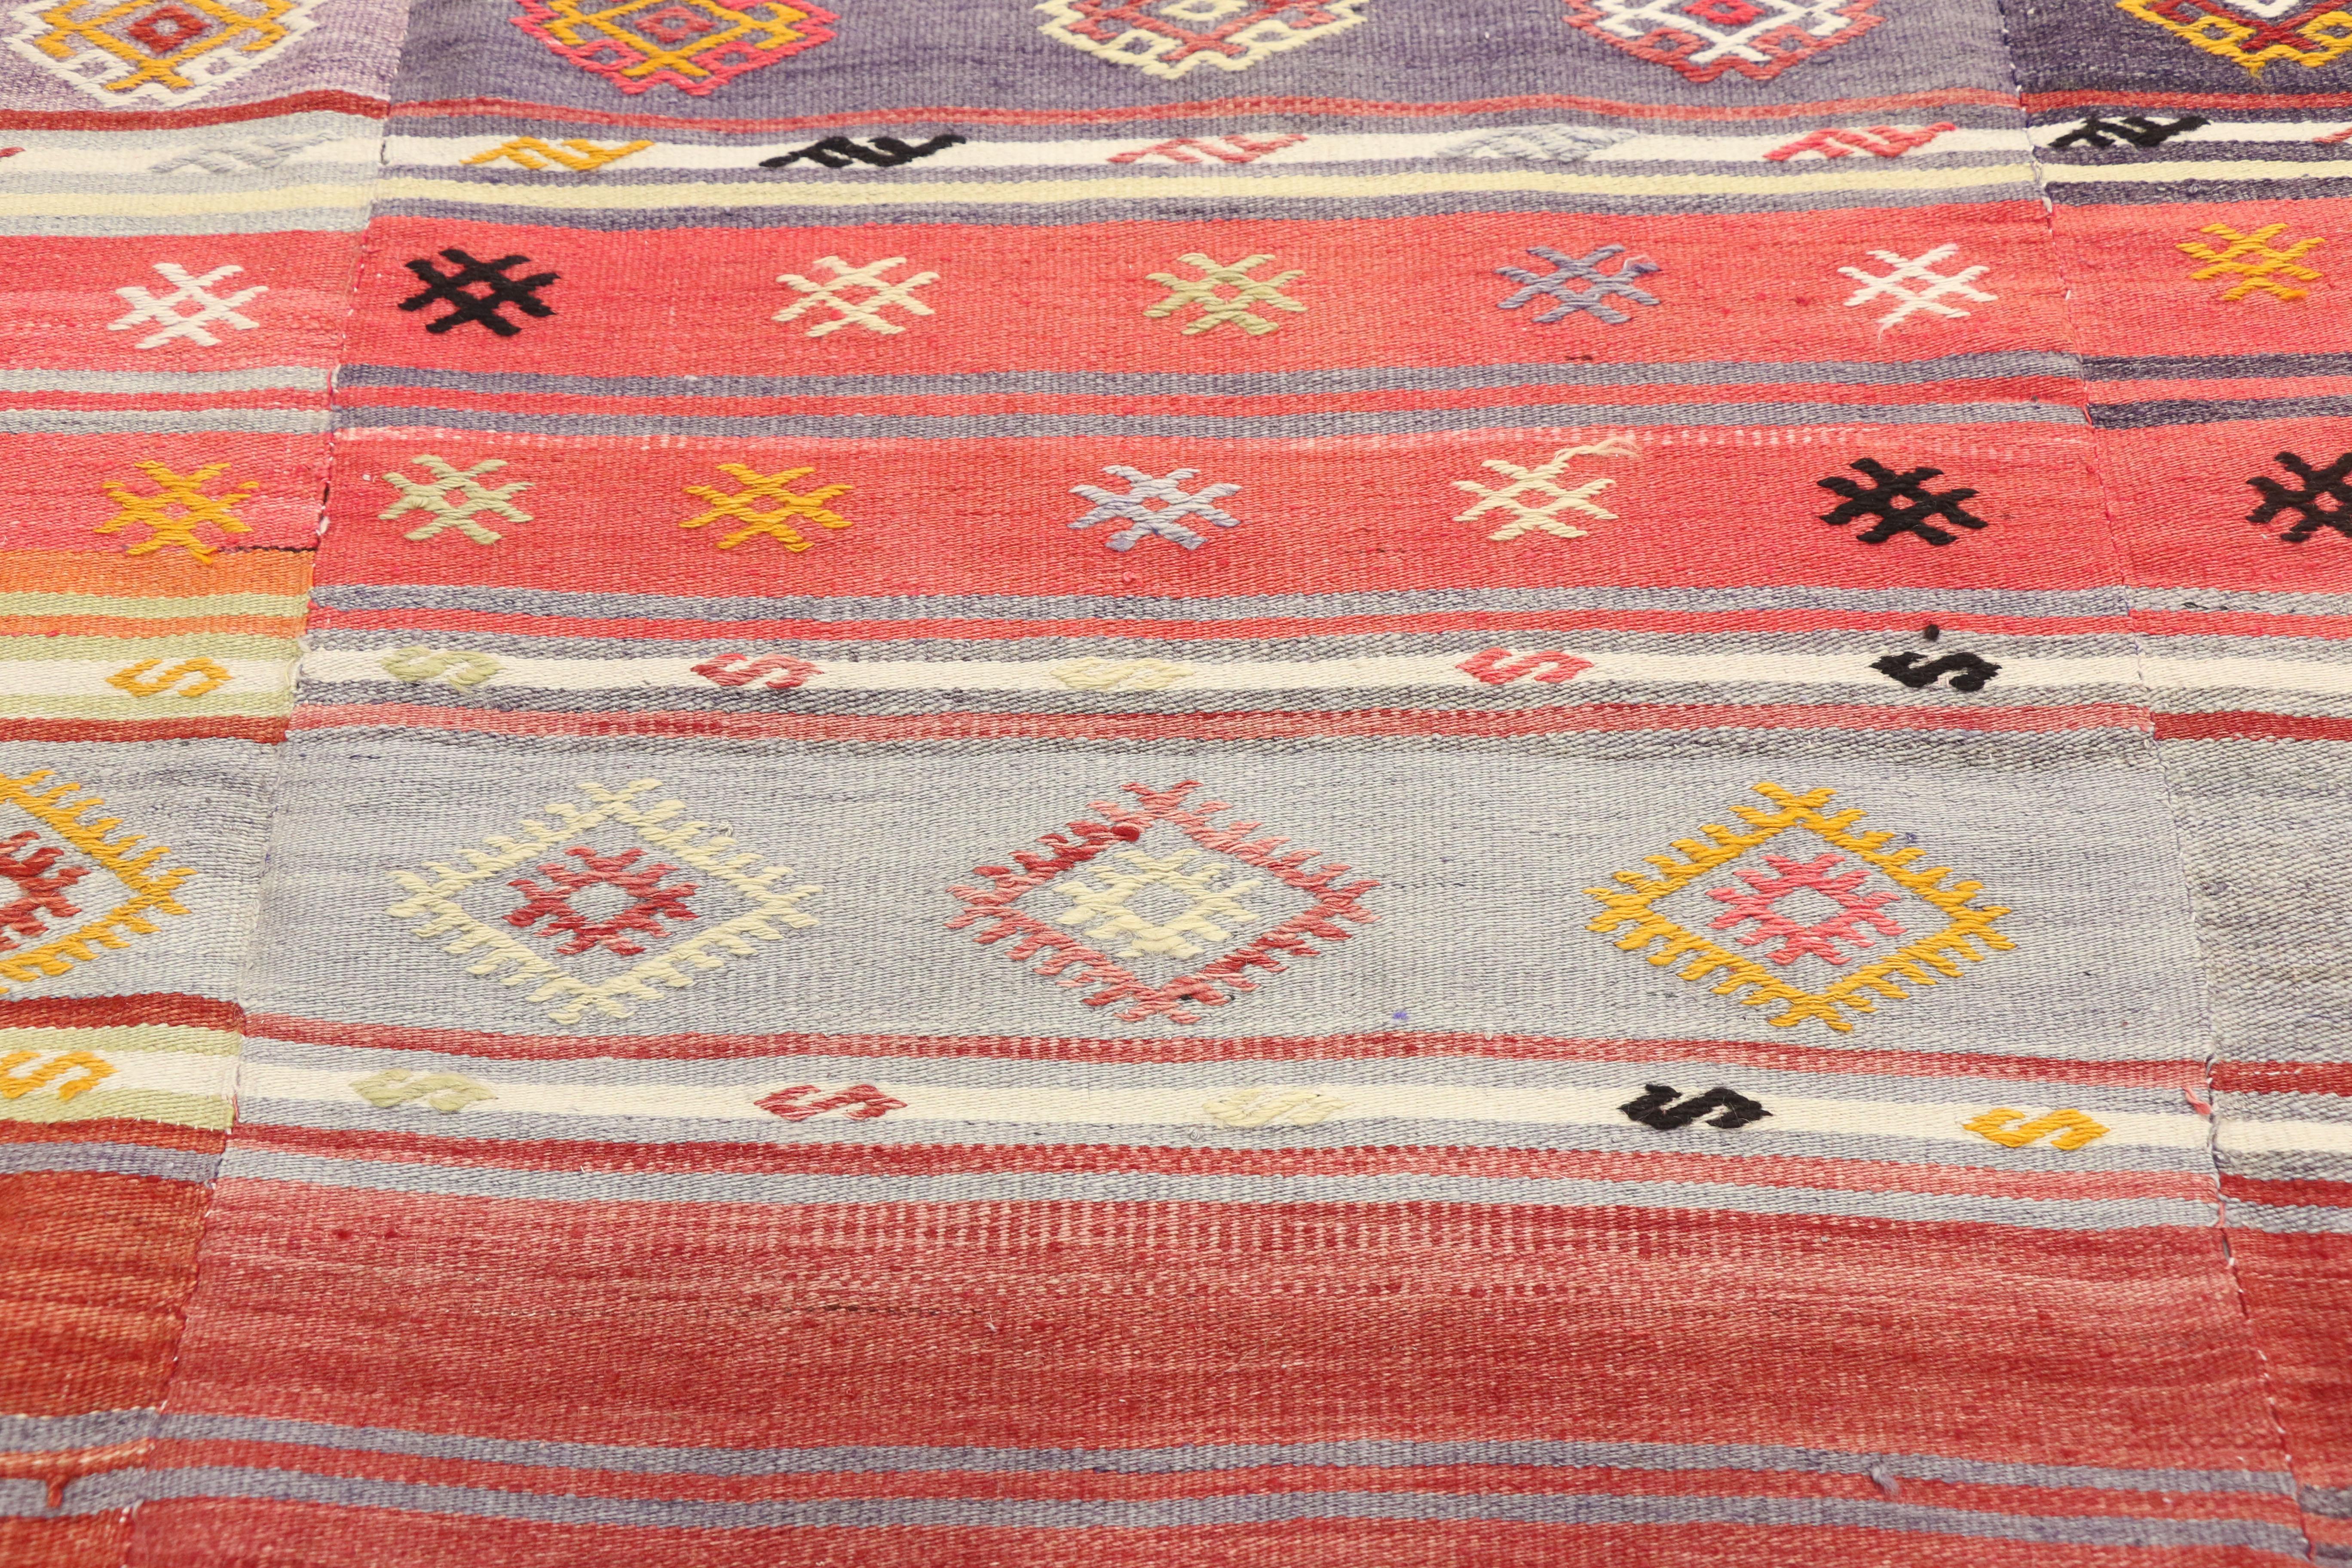 Vintage Turkish Kilim Rug with Tribal Style Boho Chic Flat-Weave Kilim Rug In Good Condition For Sale In Dallas, TX